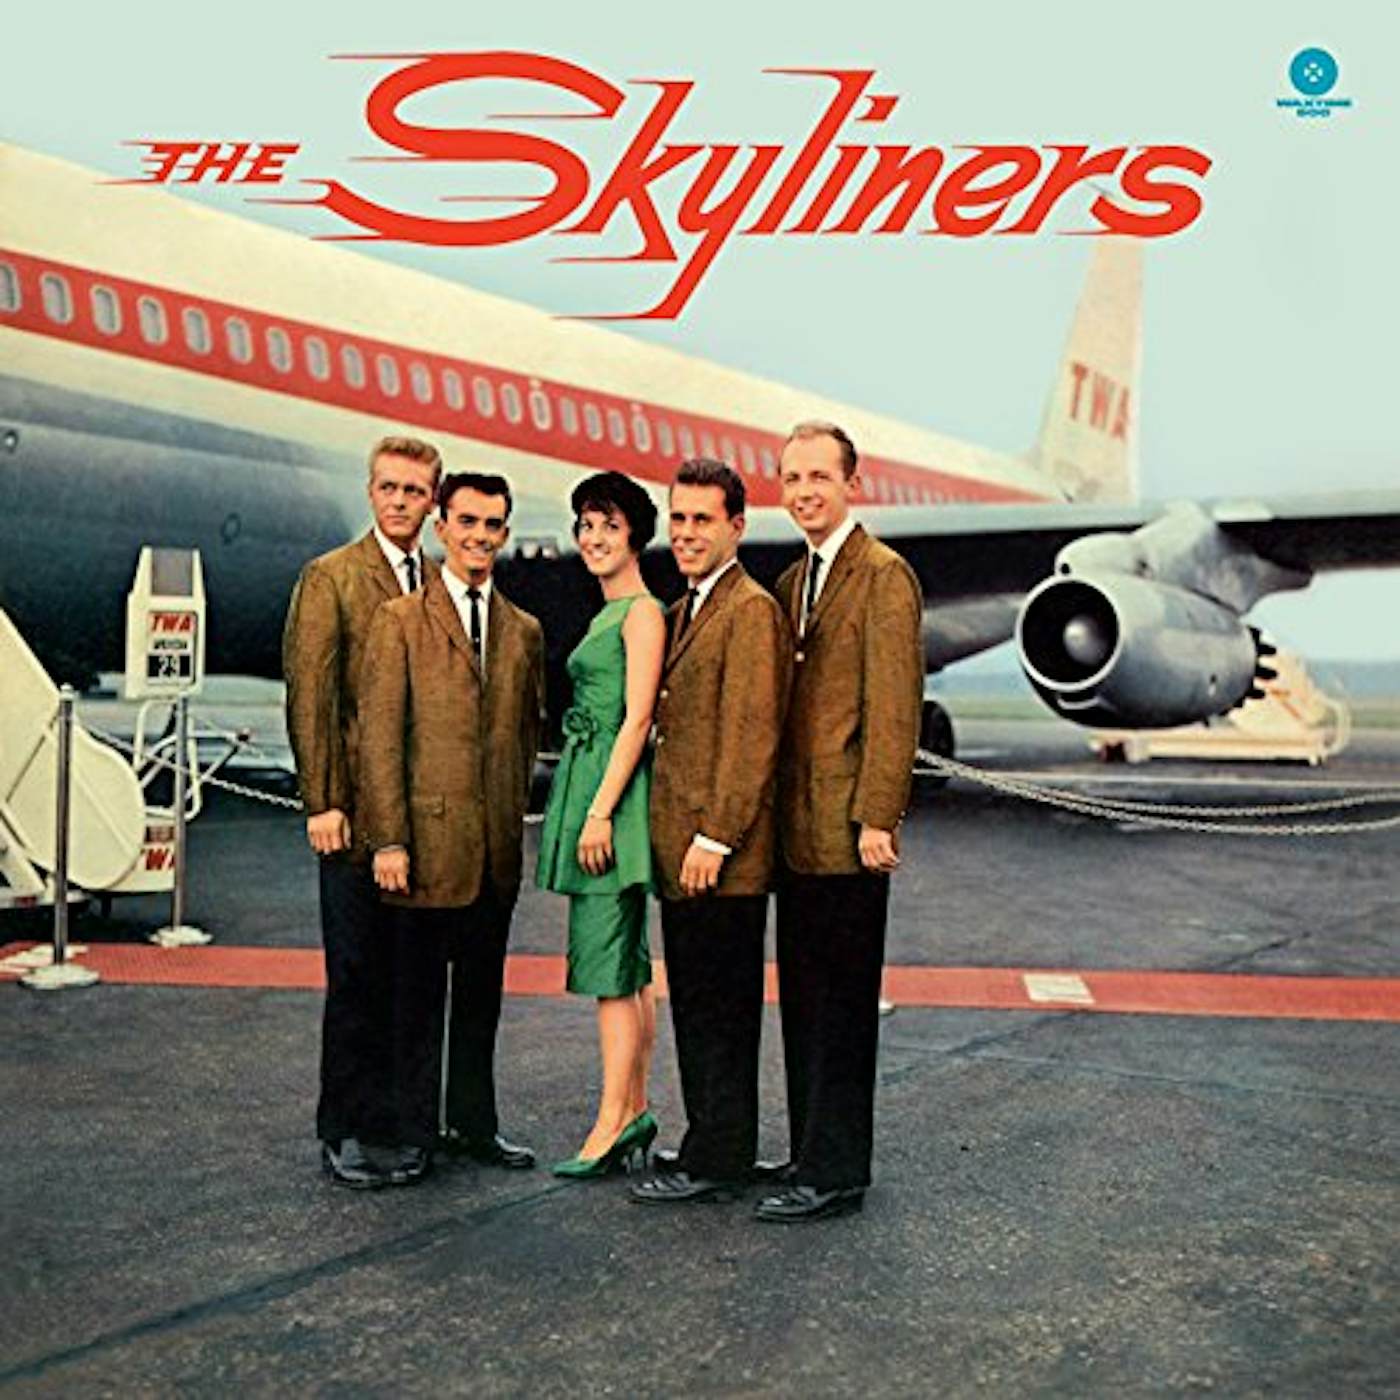 SKYLYNERS (BONUS TRACKS) Vinyl Record - Limited Edition, Collector's Edition, Remastered, Spain Release